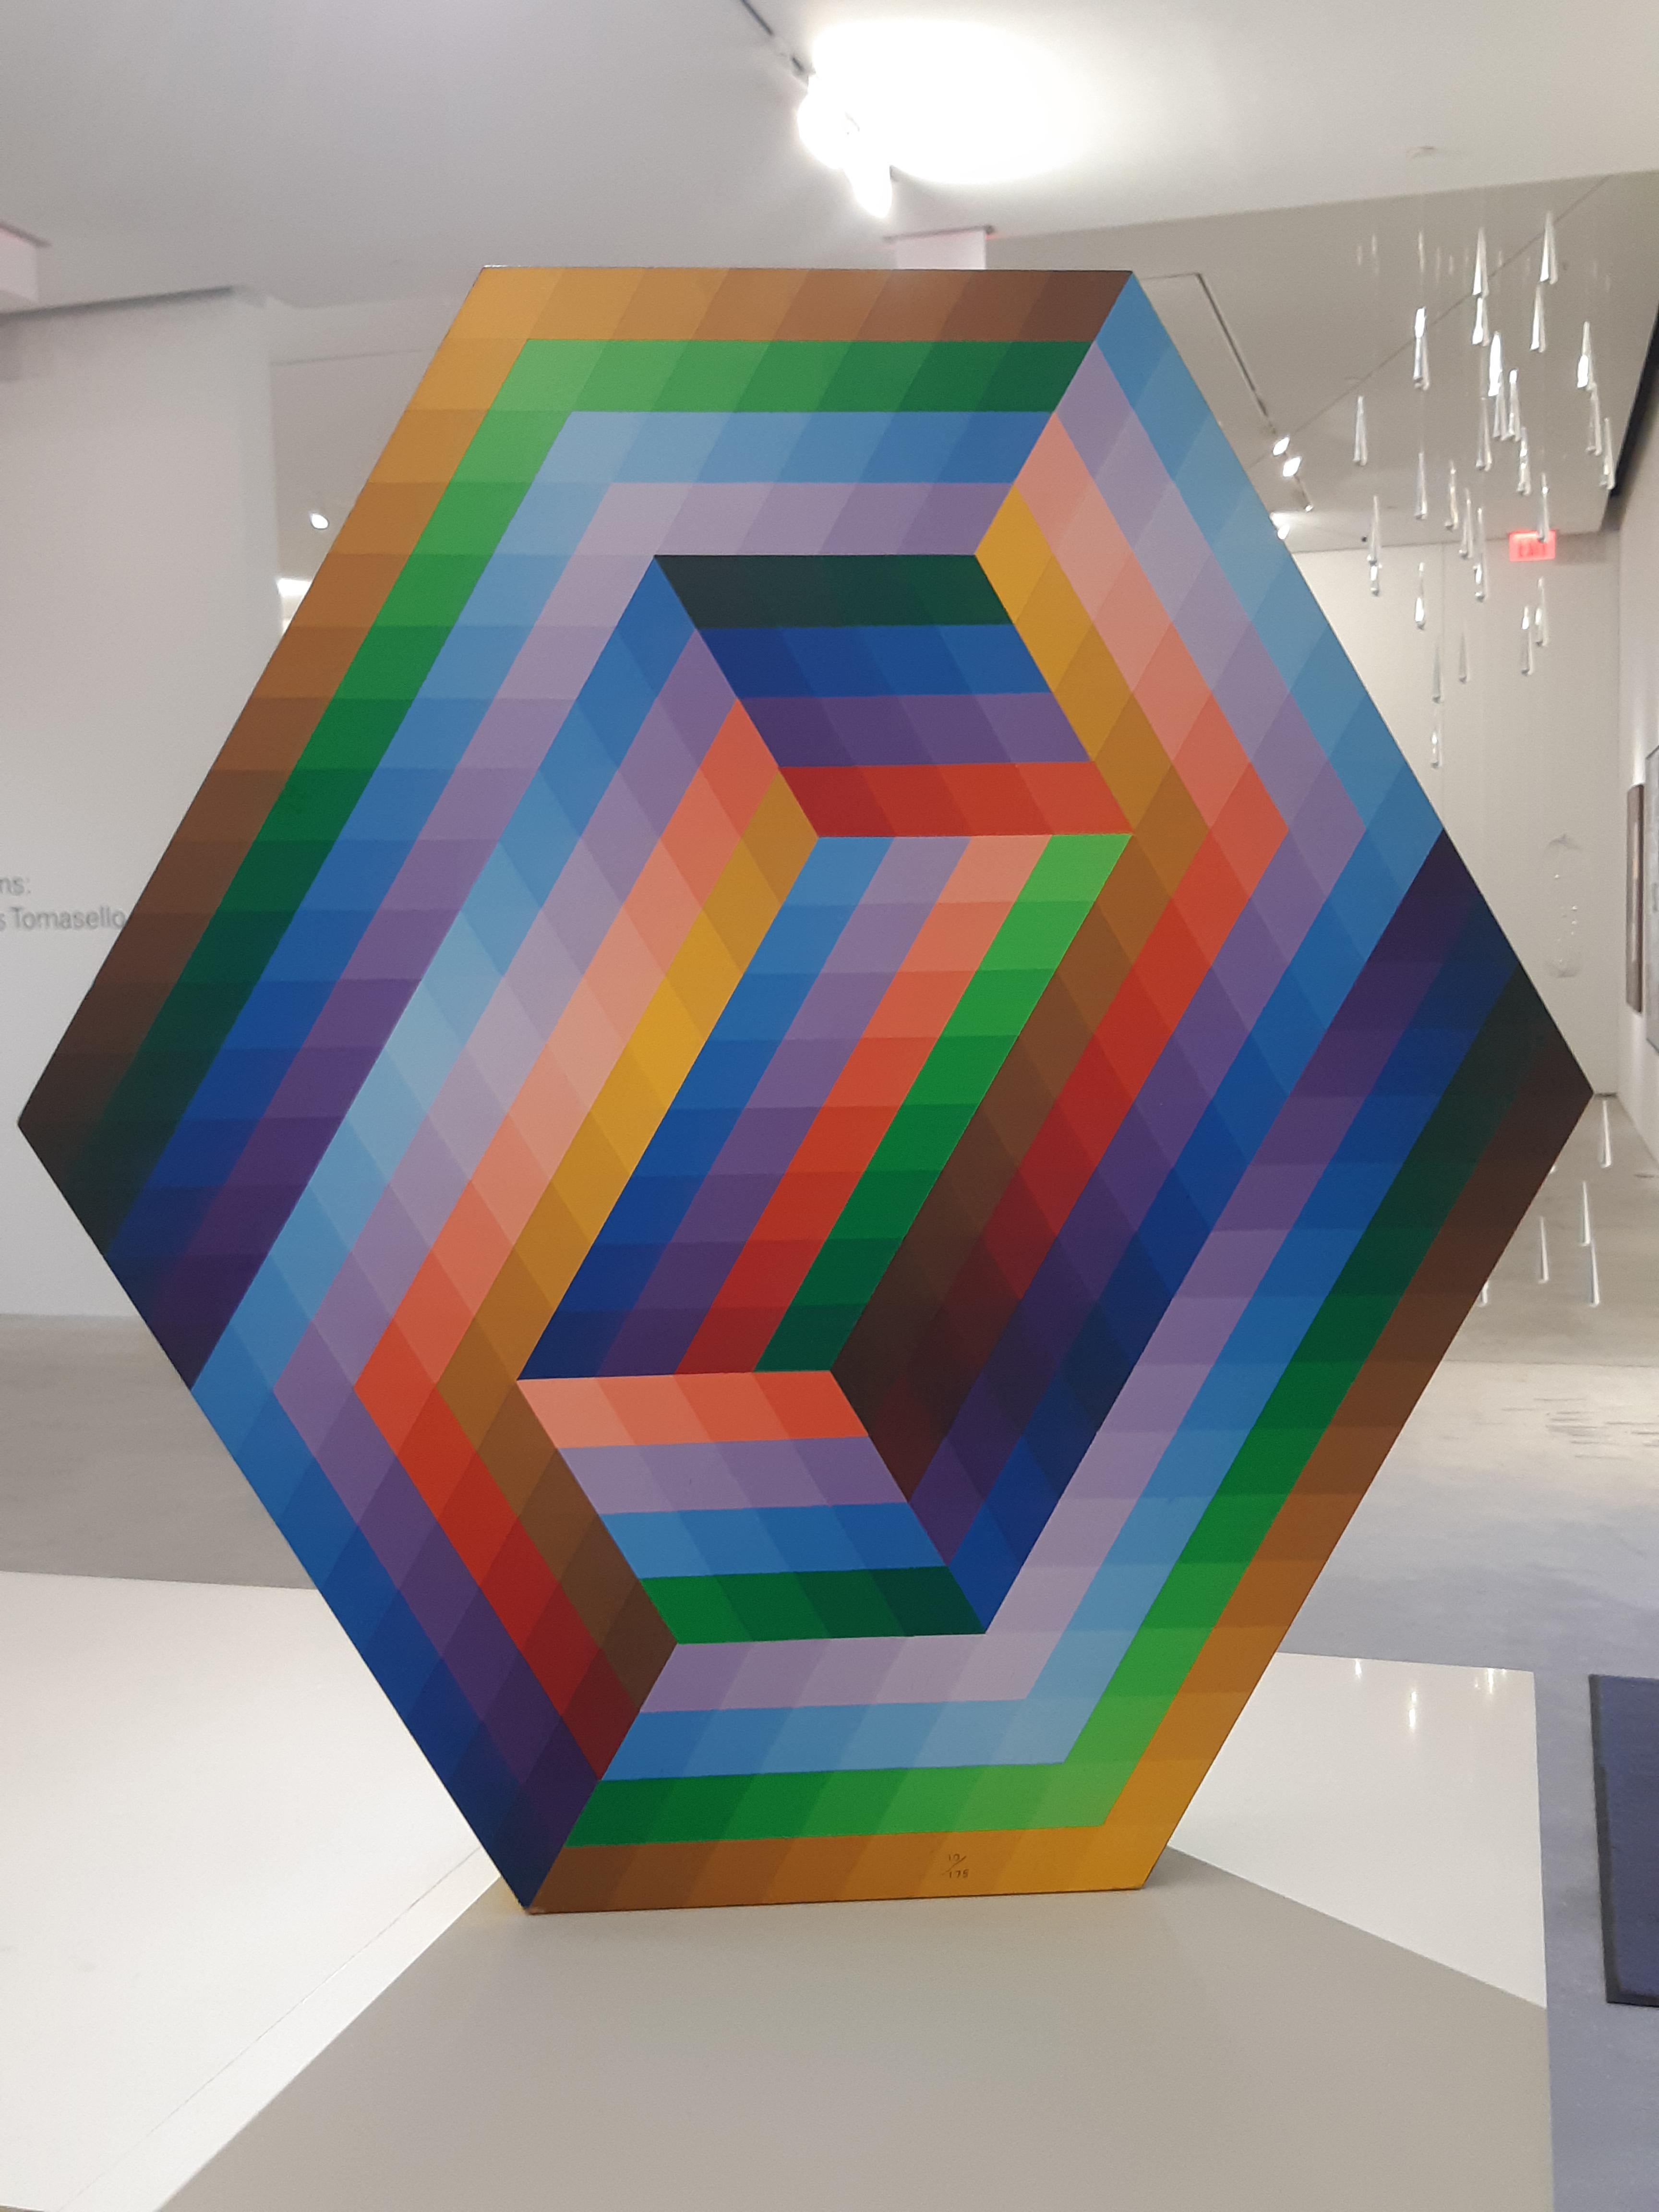 Victor Vasarely
Kedzi, 1990
Edition 10/175
Acrylic on Wood
26 x 25.5 x 3.2 in.
66 x 64.7 x 8.1 cm

The artwork is signed, dated and numbered.

Born in 1907 in Pécs, Austria-Hungary, Vasarely enrolled at the Műhely (workshop) school, the local